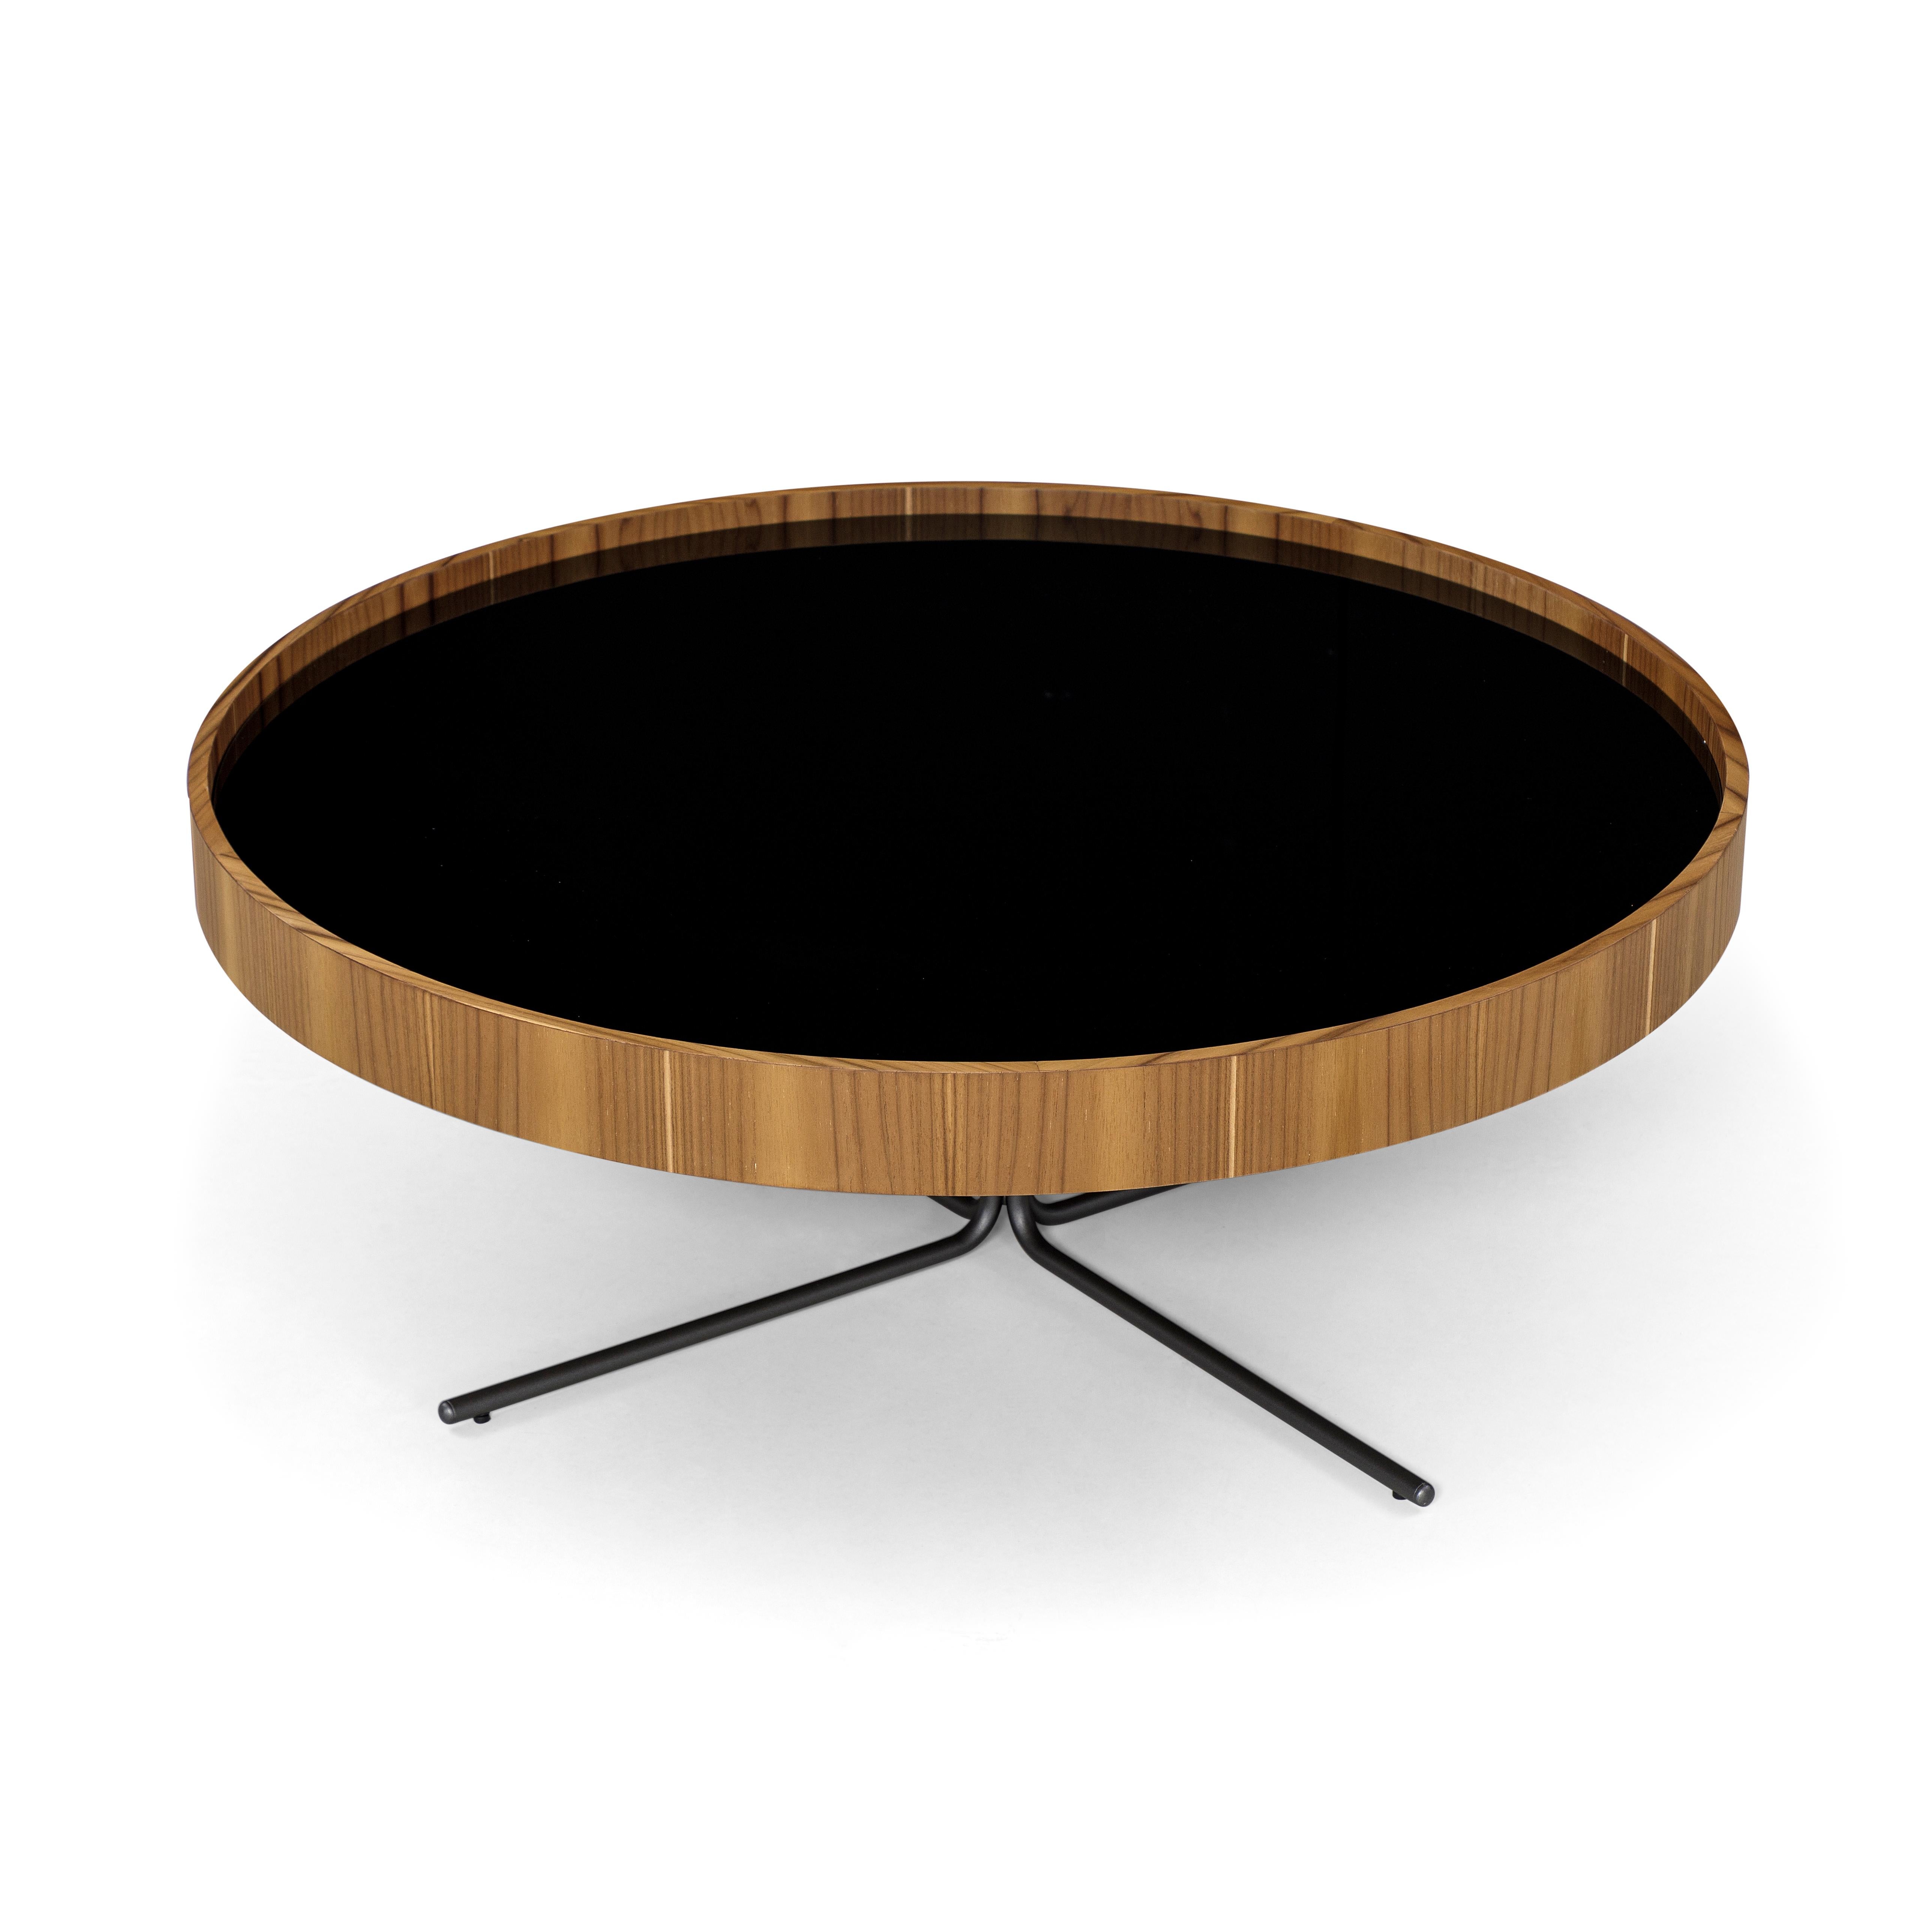 Brazilian Regia Occasional Table in Teak Wood Finish Featuring Black Glass 39'' For Sale